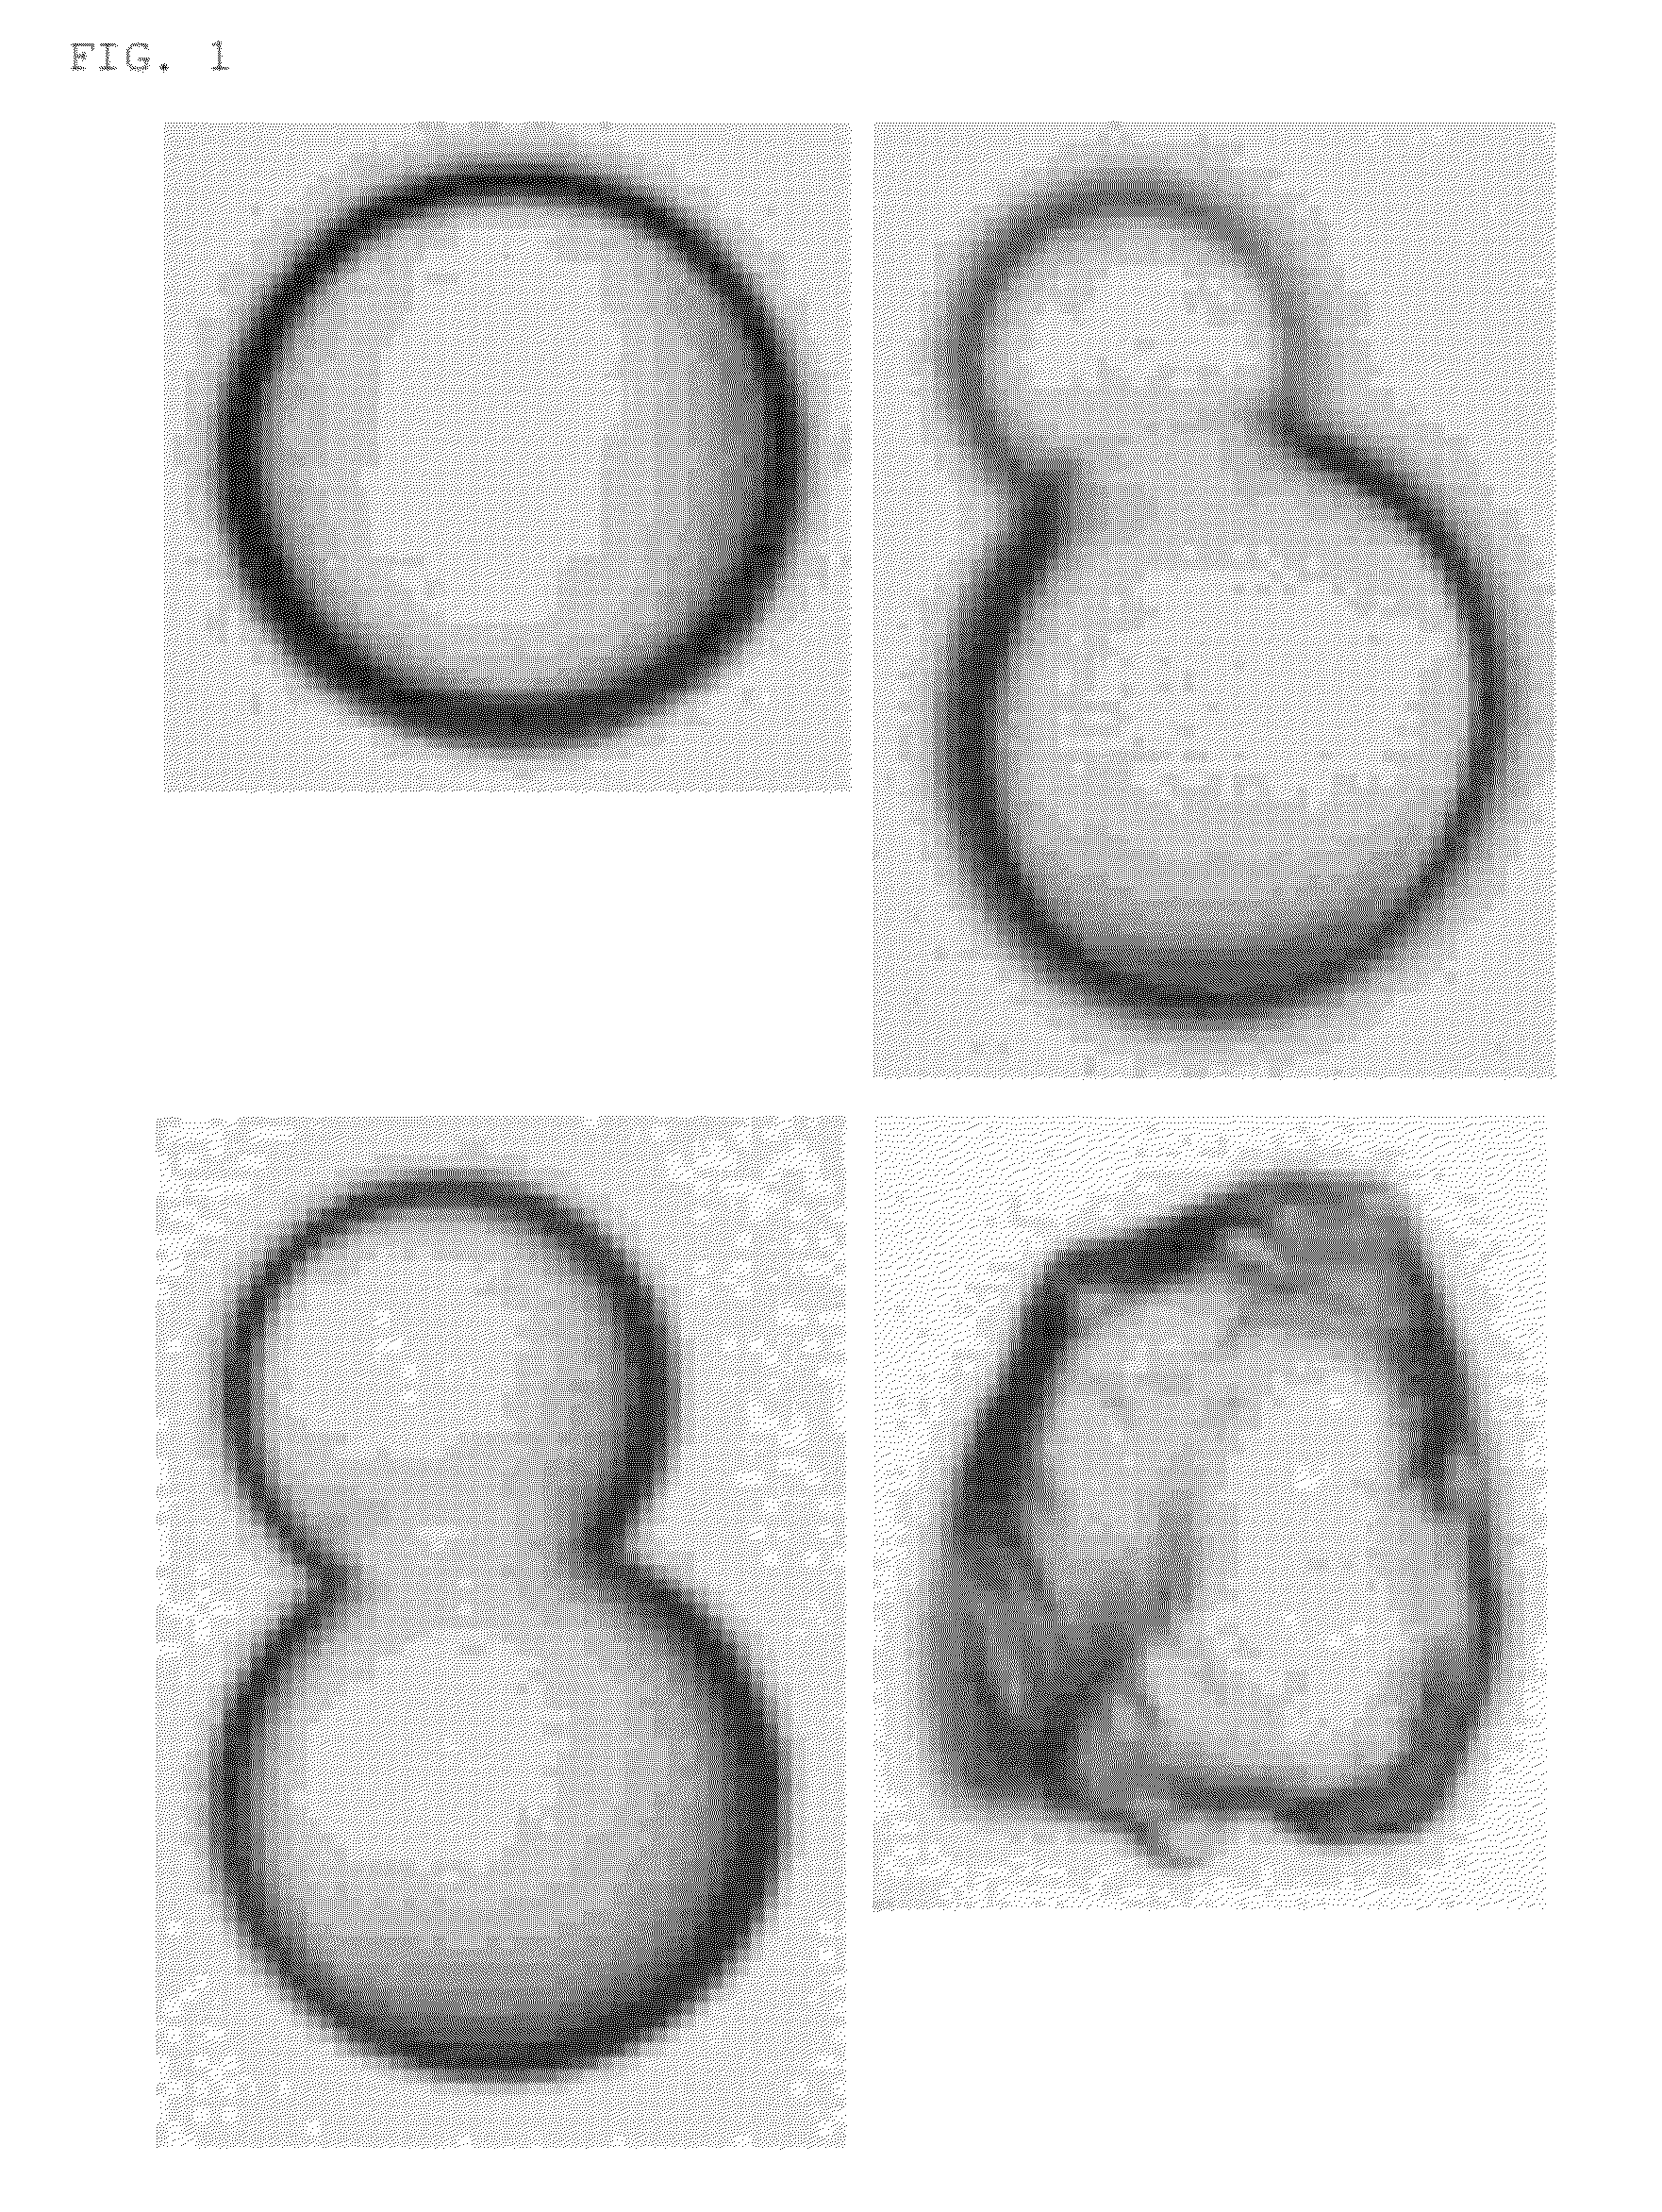 Synthetic amorphous silica powder and method for producing same